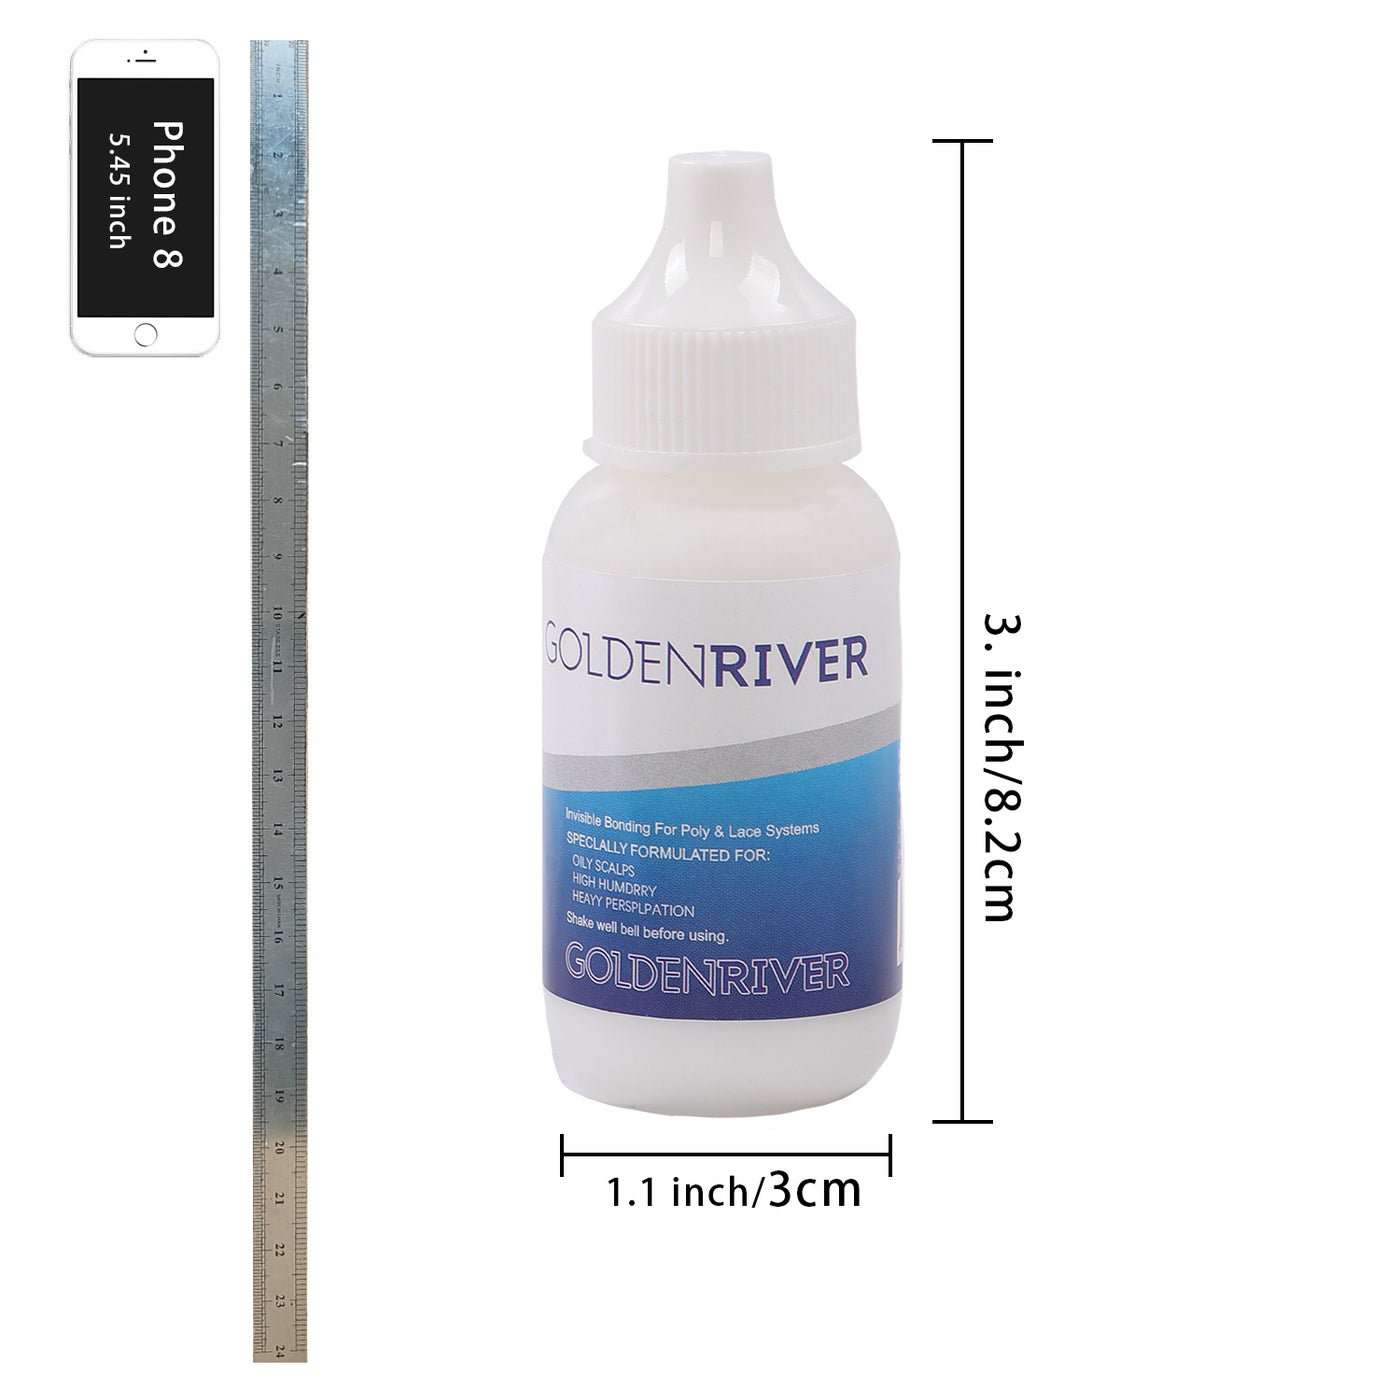 Golden River Lace Glue | Lace Wig Adhesive | Hair Lace Glue (1.3oz)